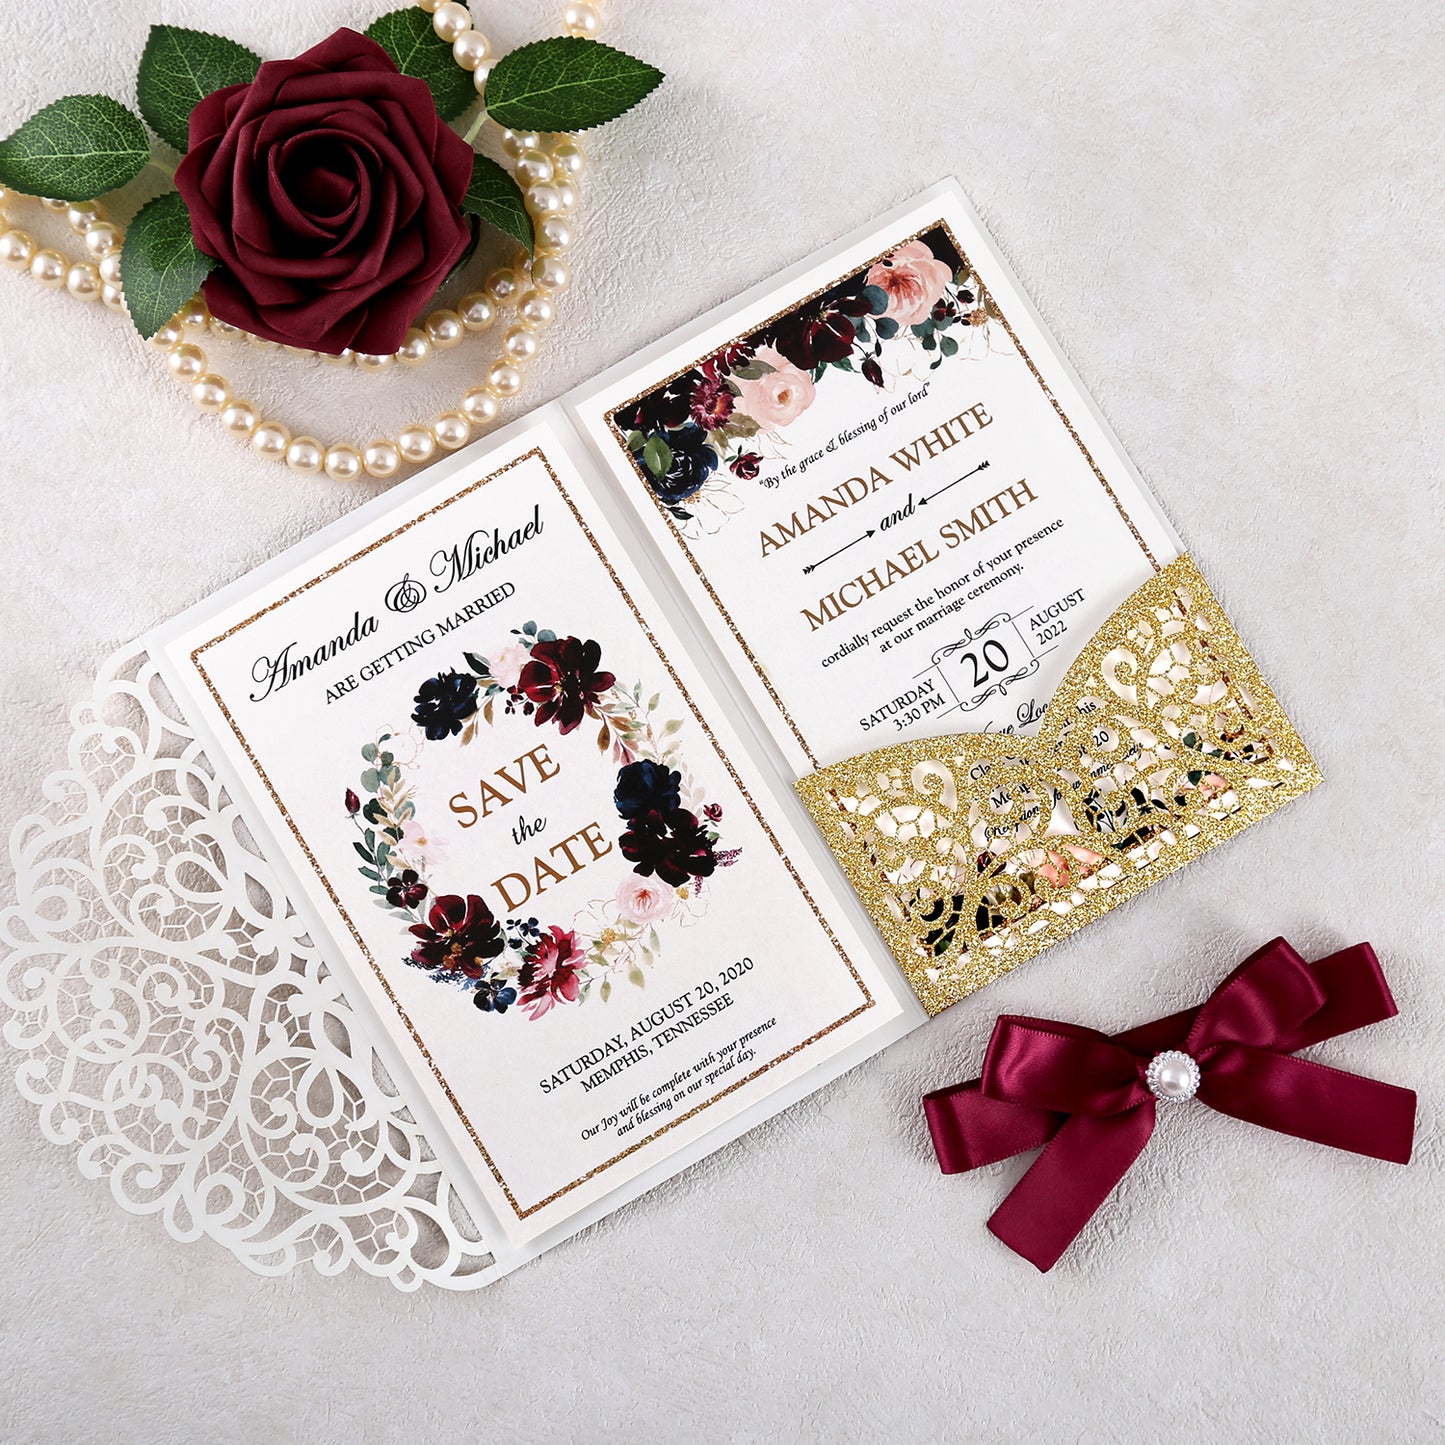 4.7 x7 inch Gold Glitter Laser Cut Hollow Rose Wedding Invitations Cards with Envelopes for Wedding Party